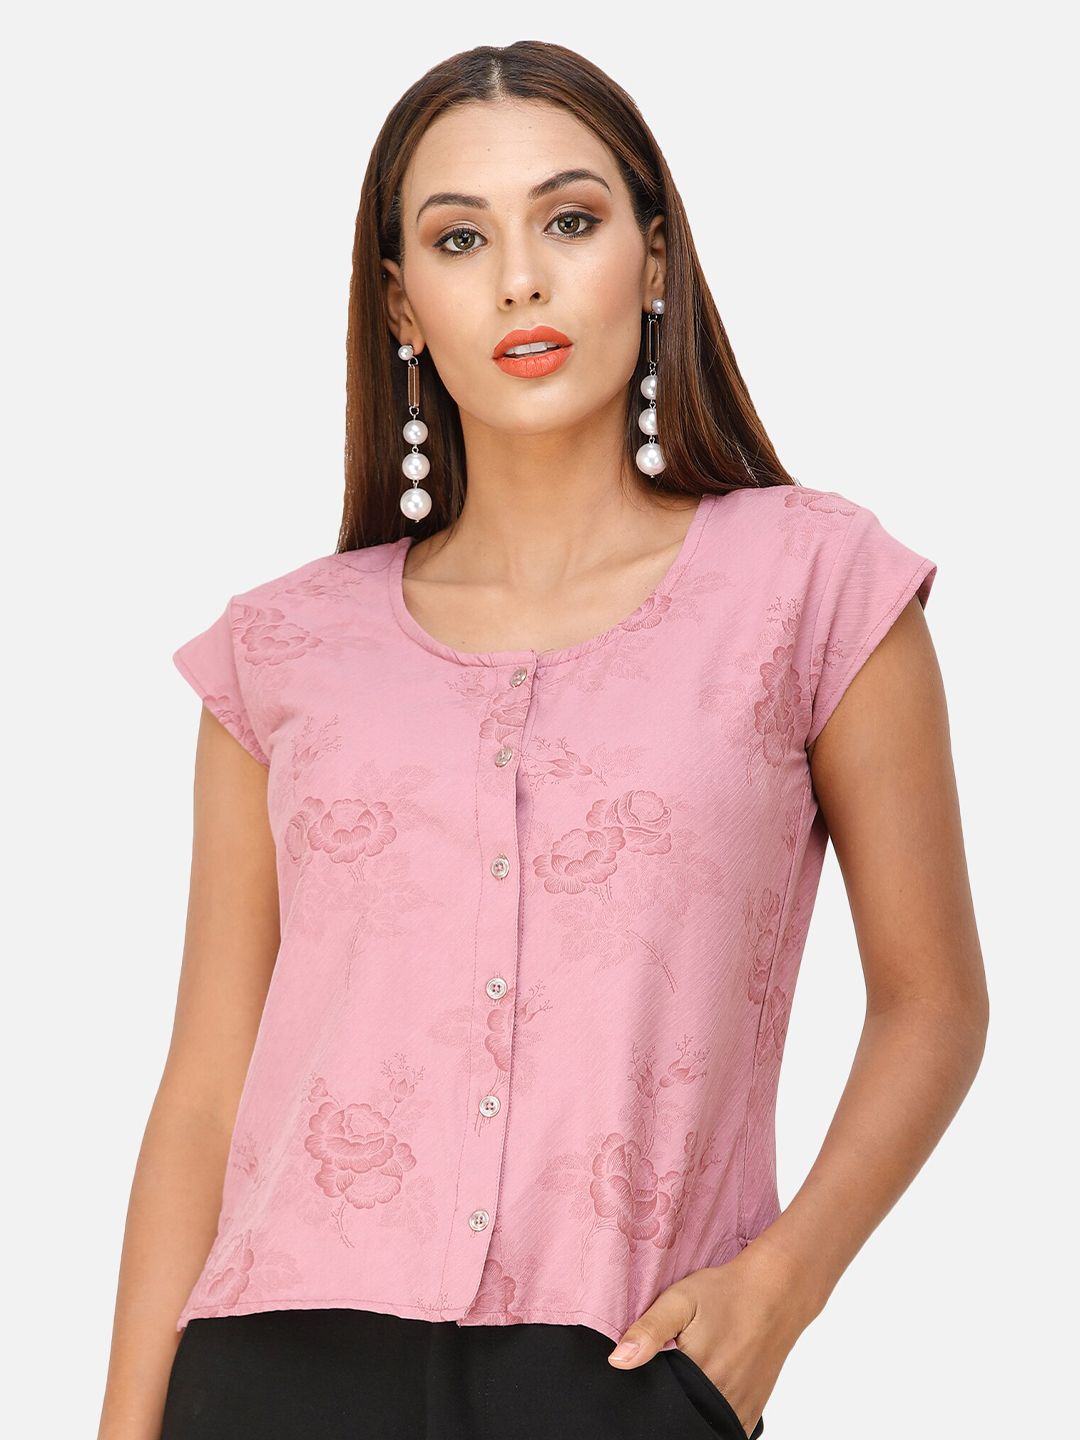 DECHEN Floral Print Casual Top Price in India